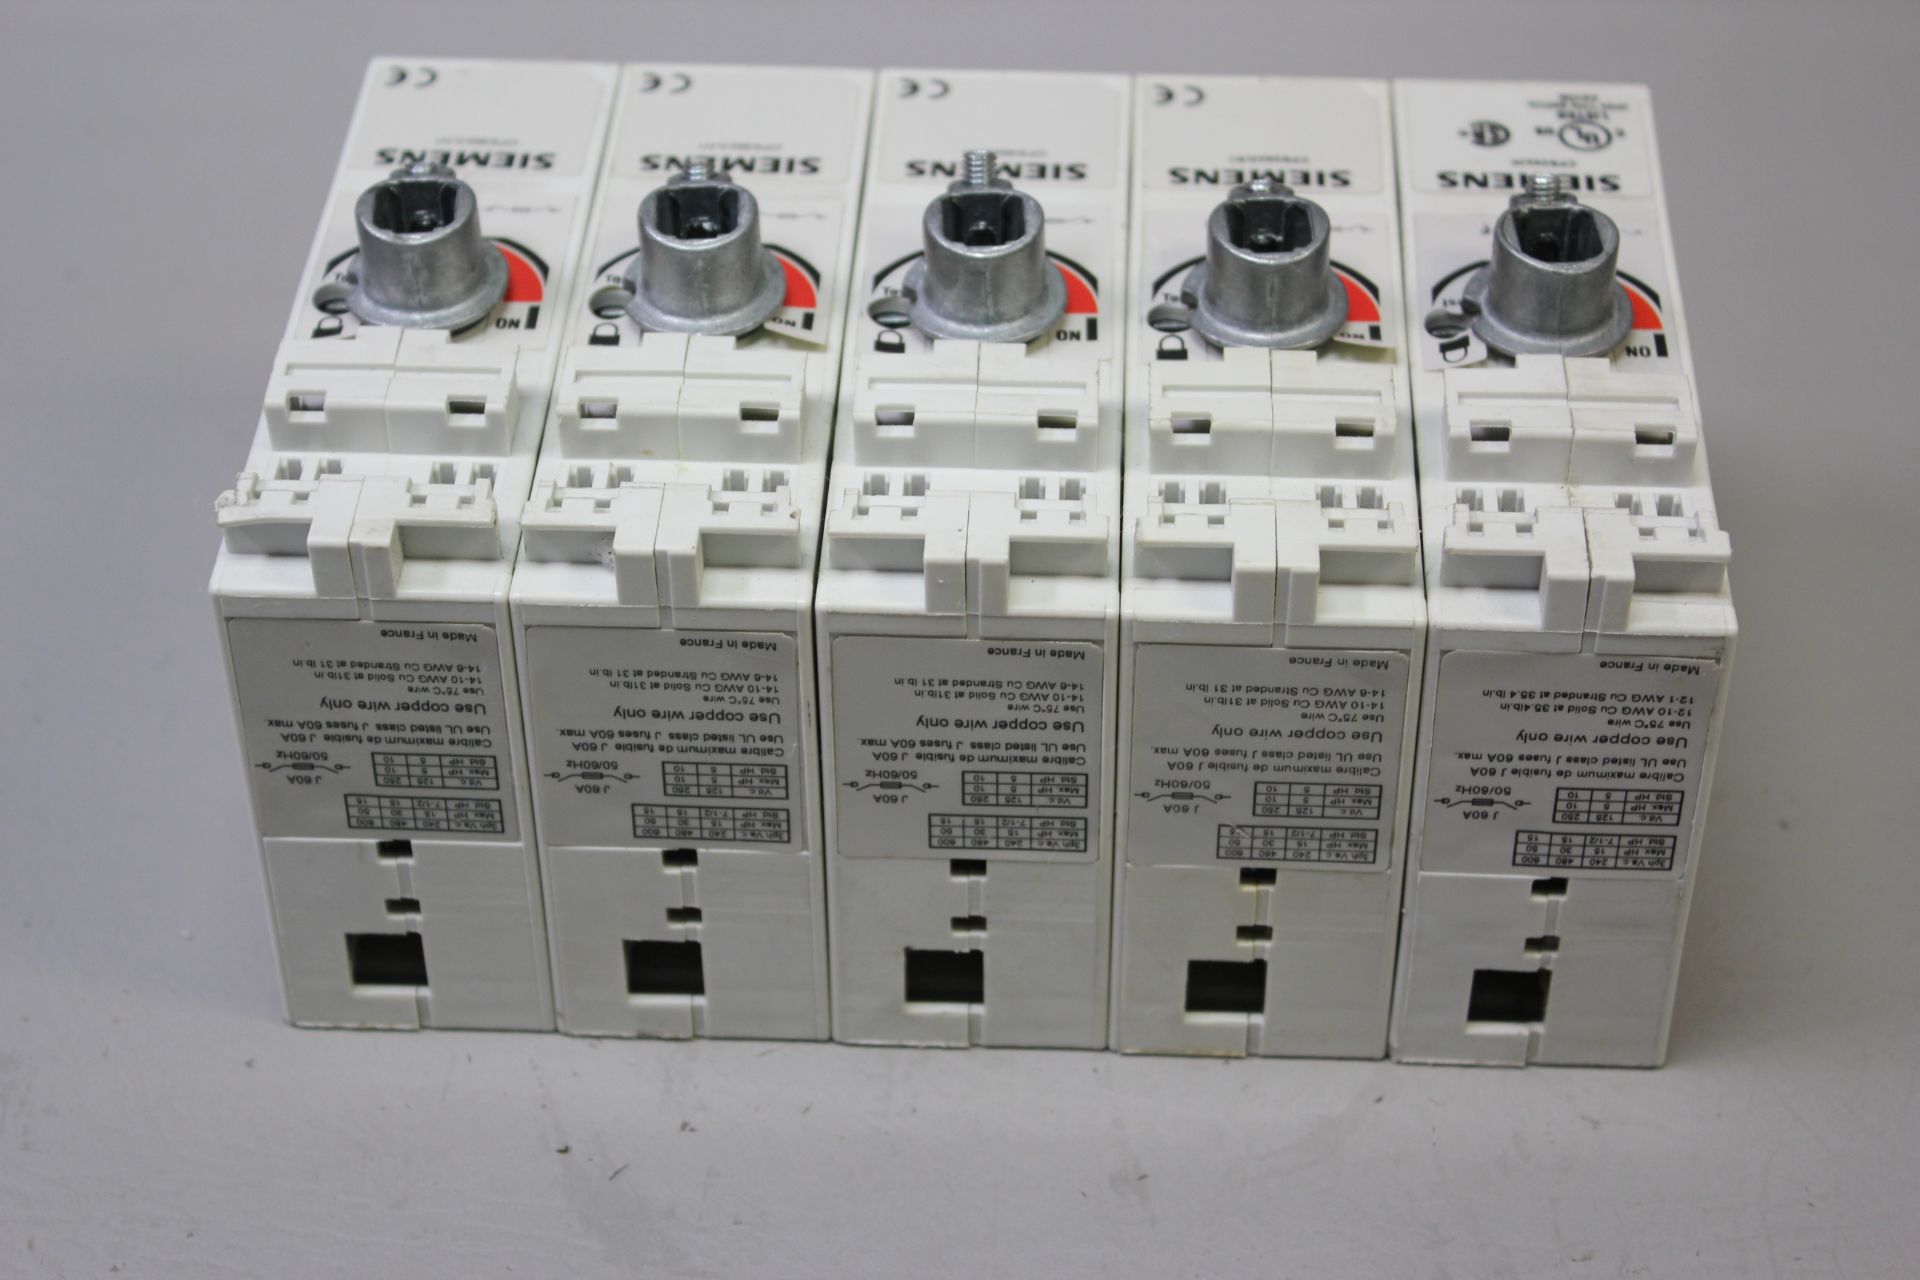 LOT OF 5 SIEMENS DISCONNECT SWITCHES - Image 3 of 3